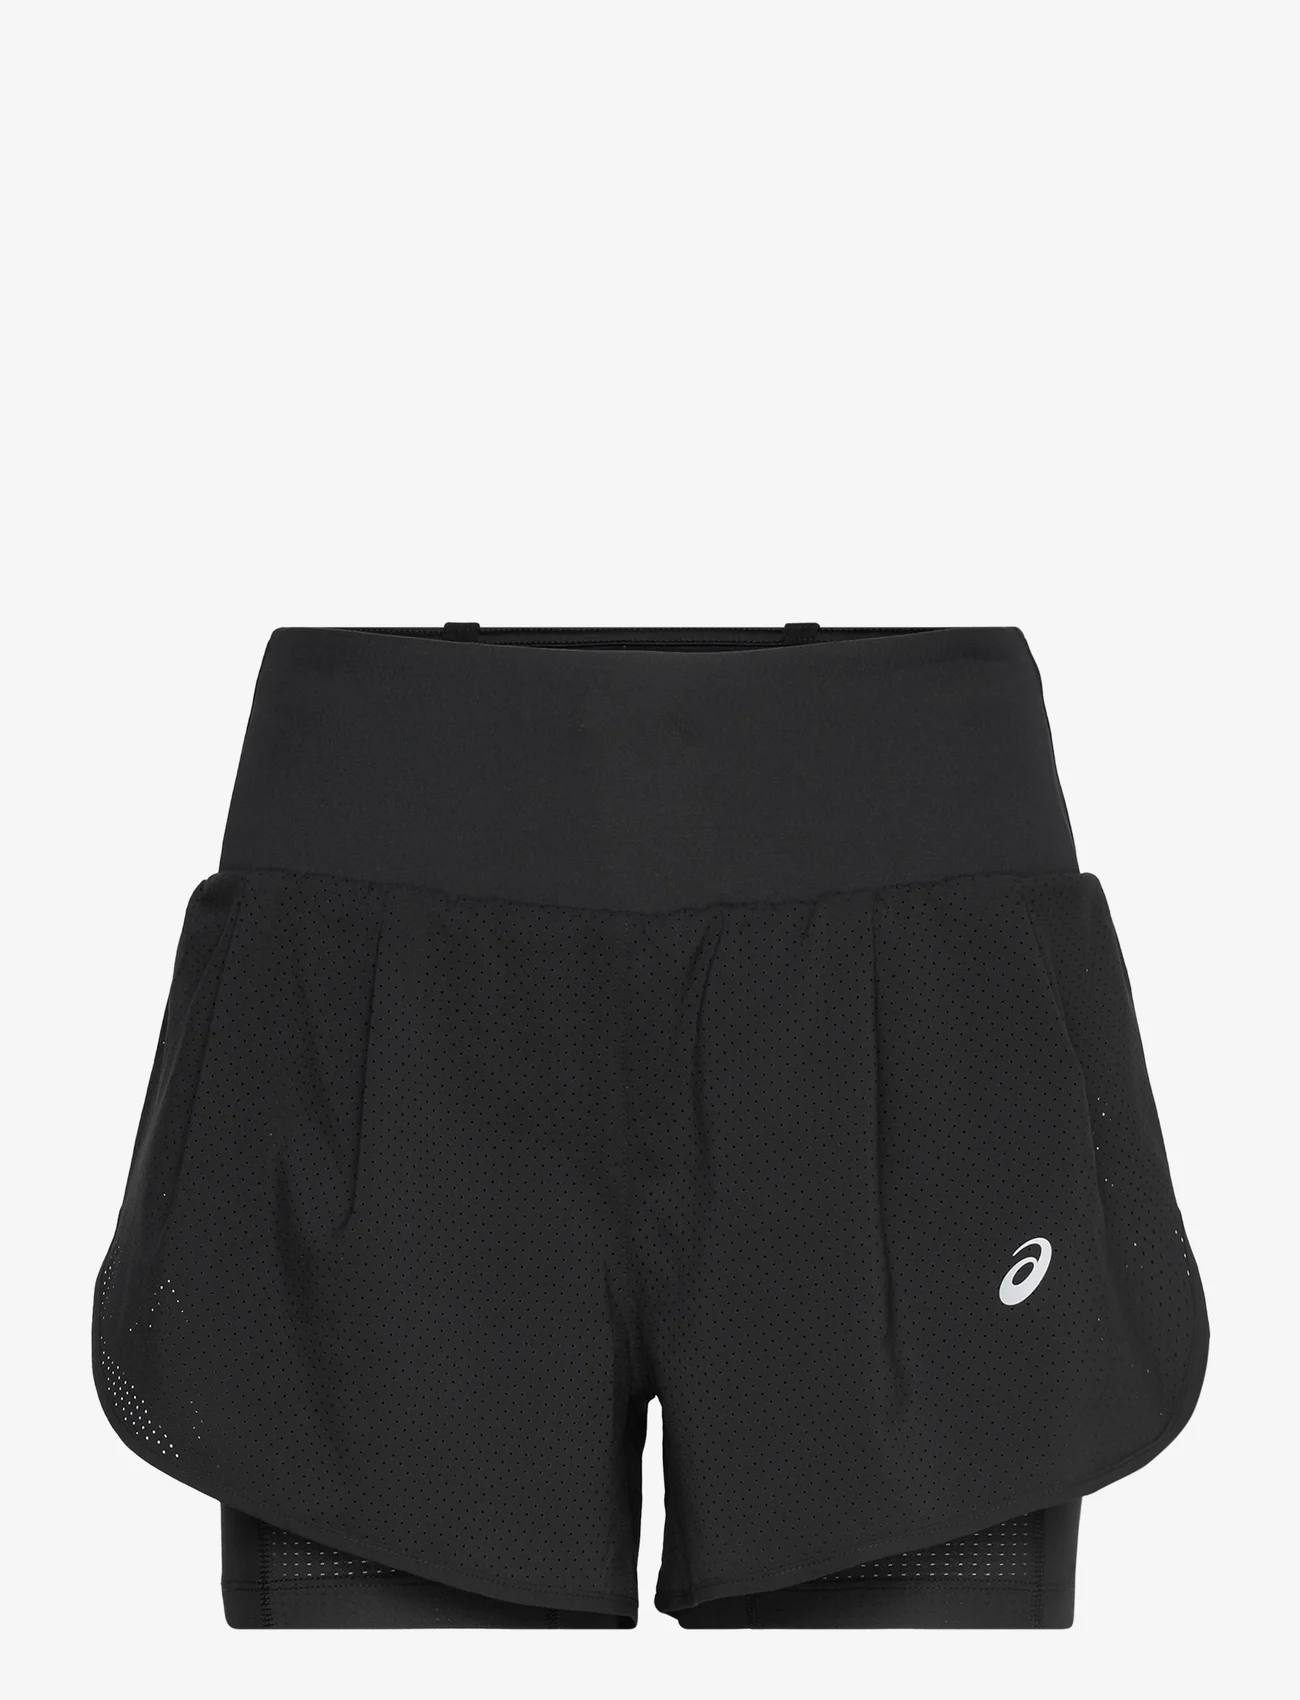 Asics - ROAD 2-N-1 3.5IN SHORT - clothes - performance black/performance black - 0